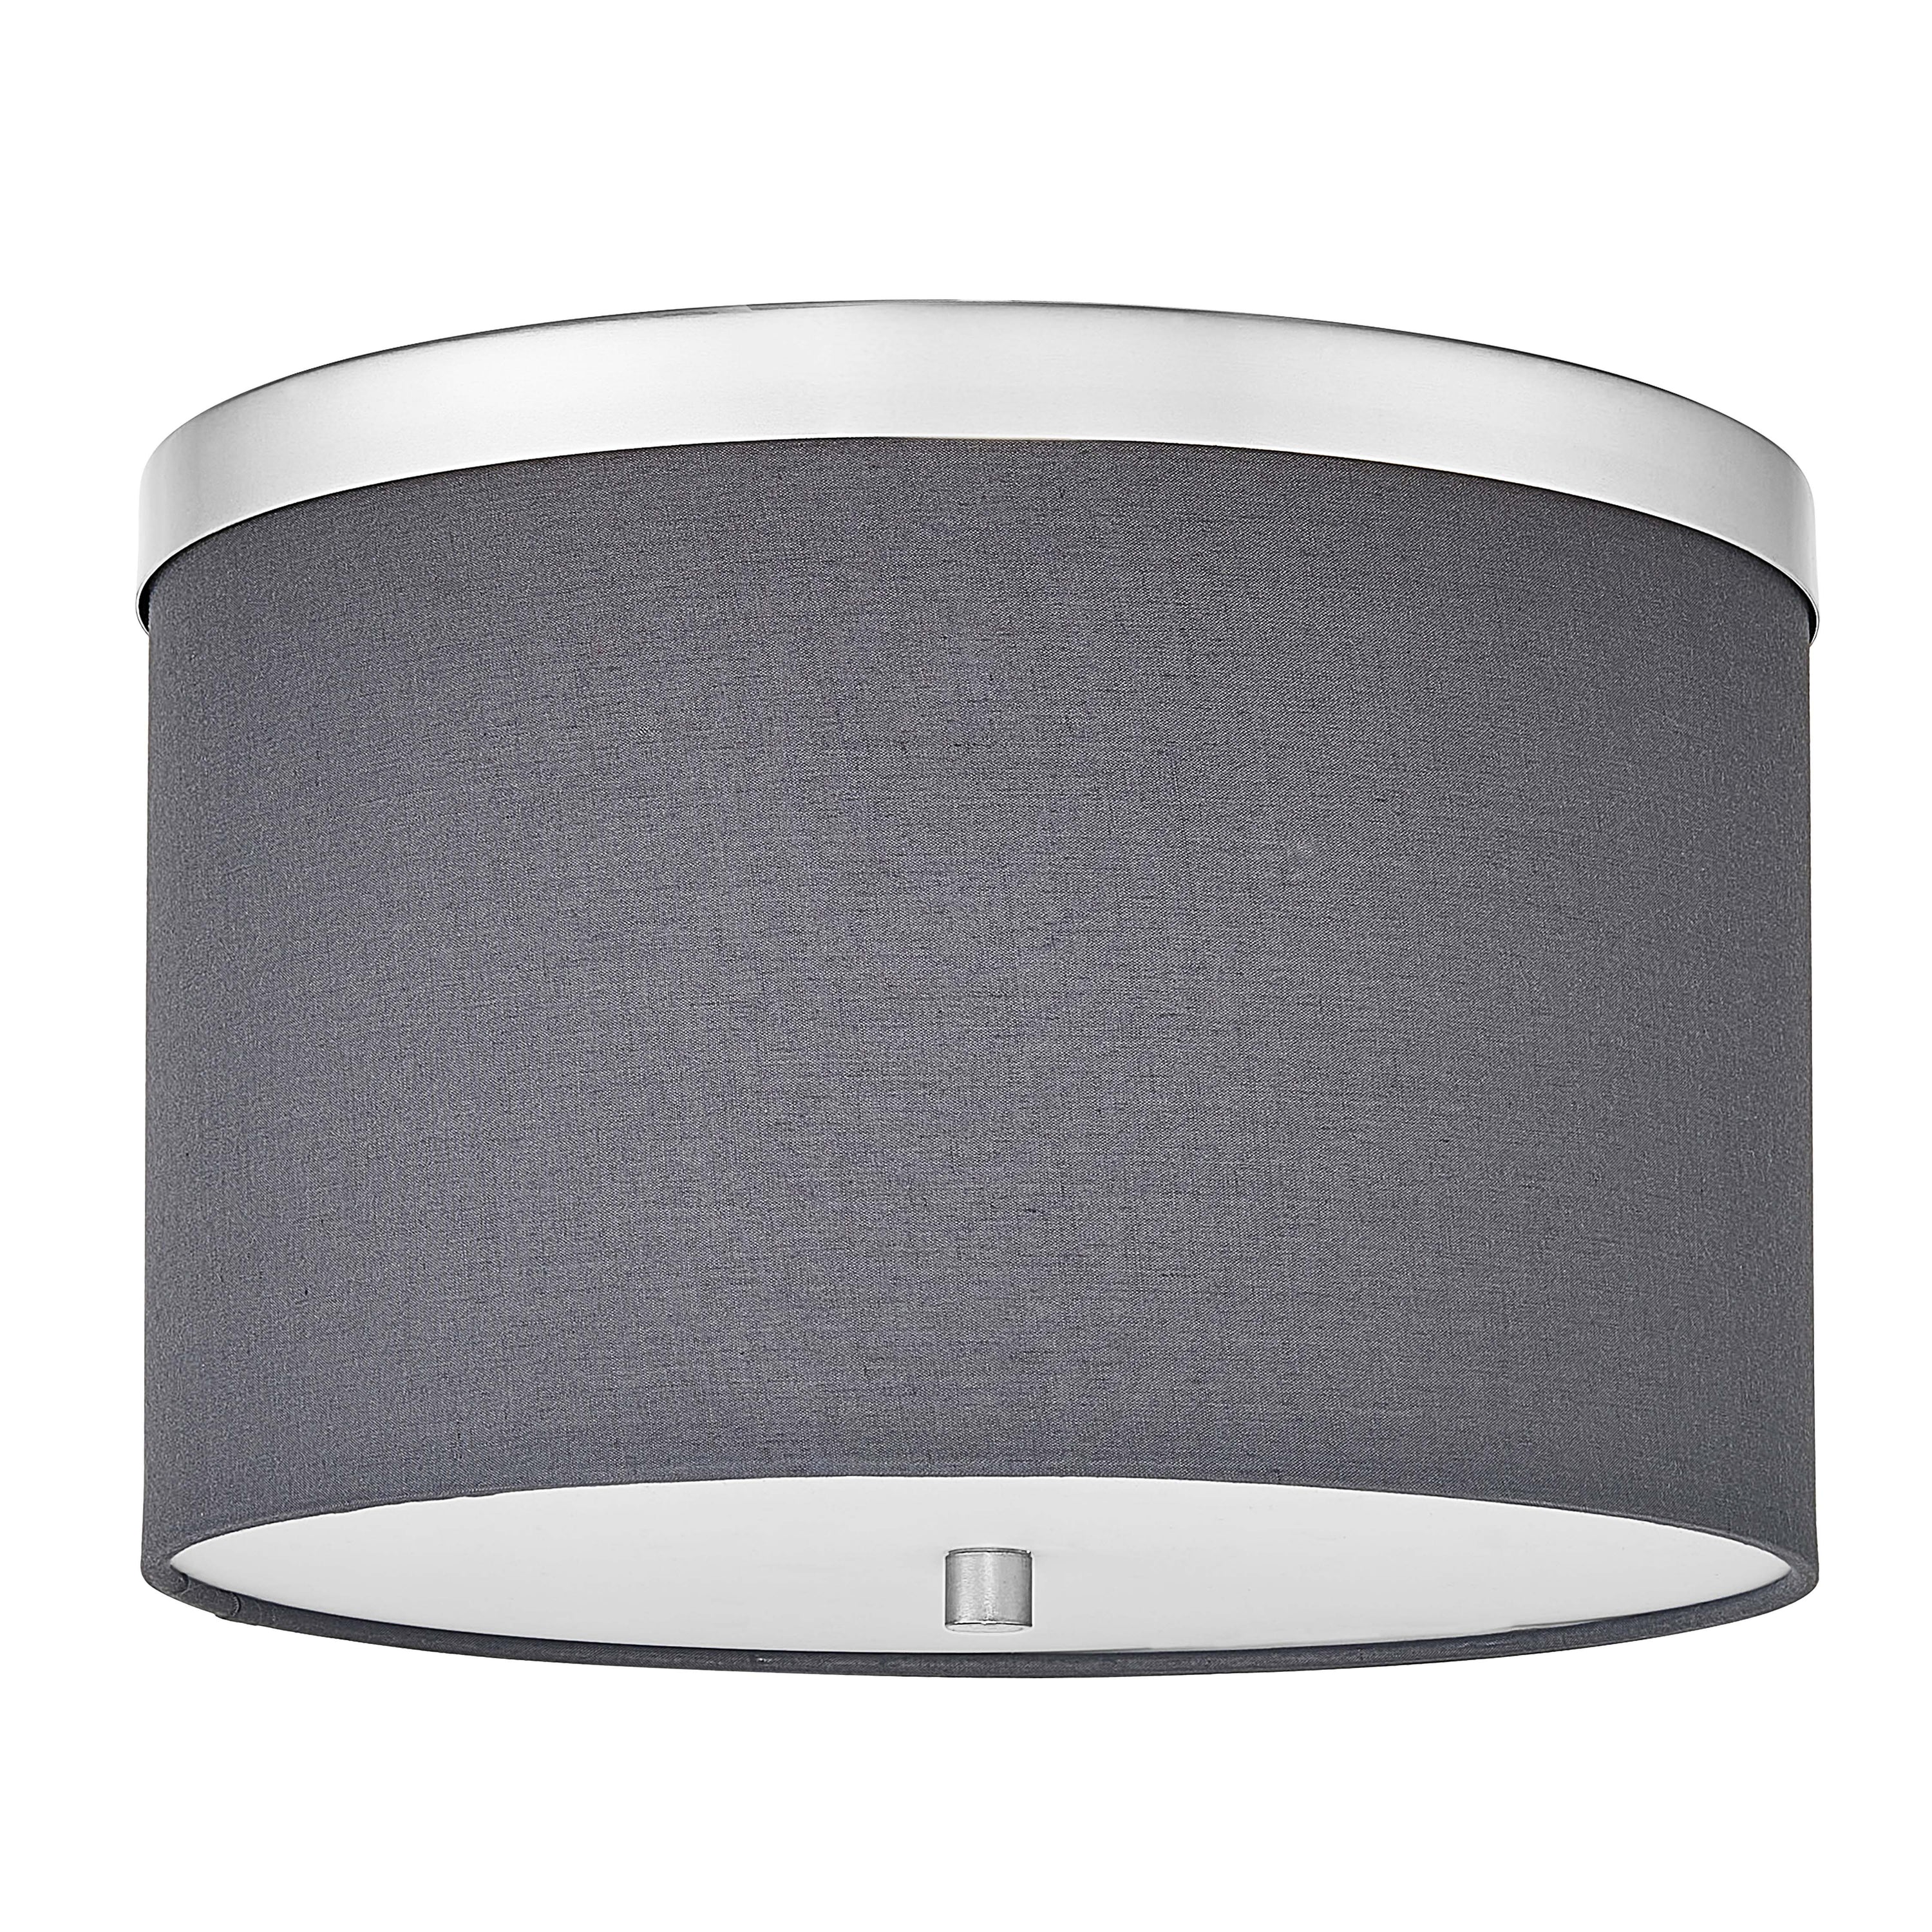 Dainolite FRD-122FH-PC-GRY 2 Light Incandescent Flush Mount Polished Chrome with Grey Shade